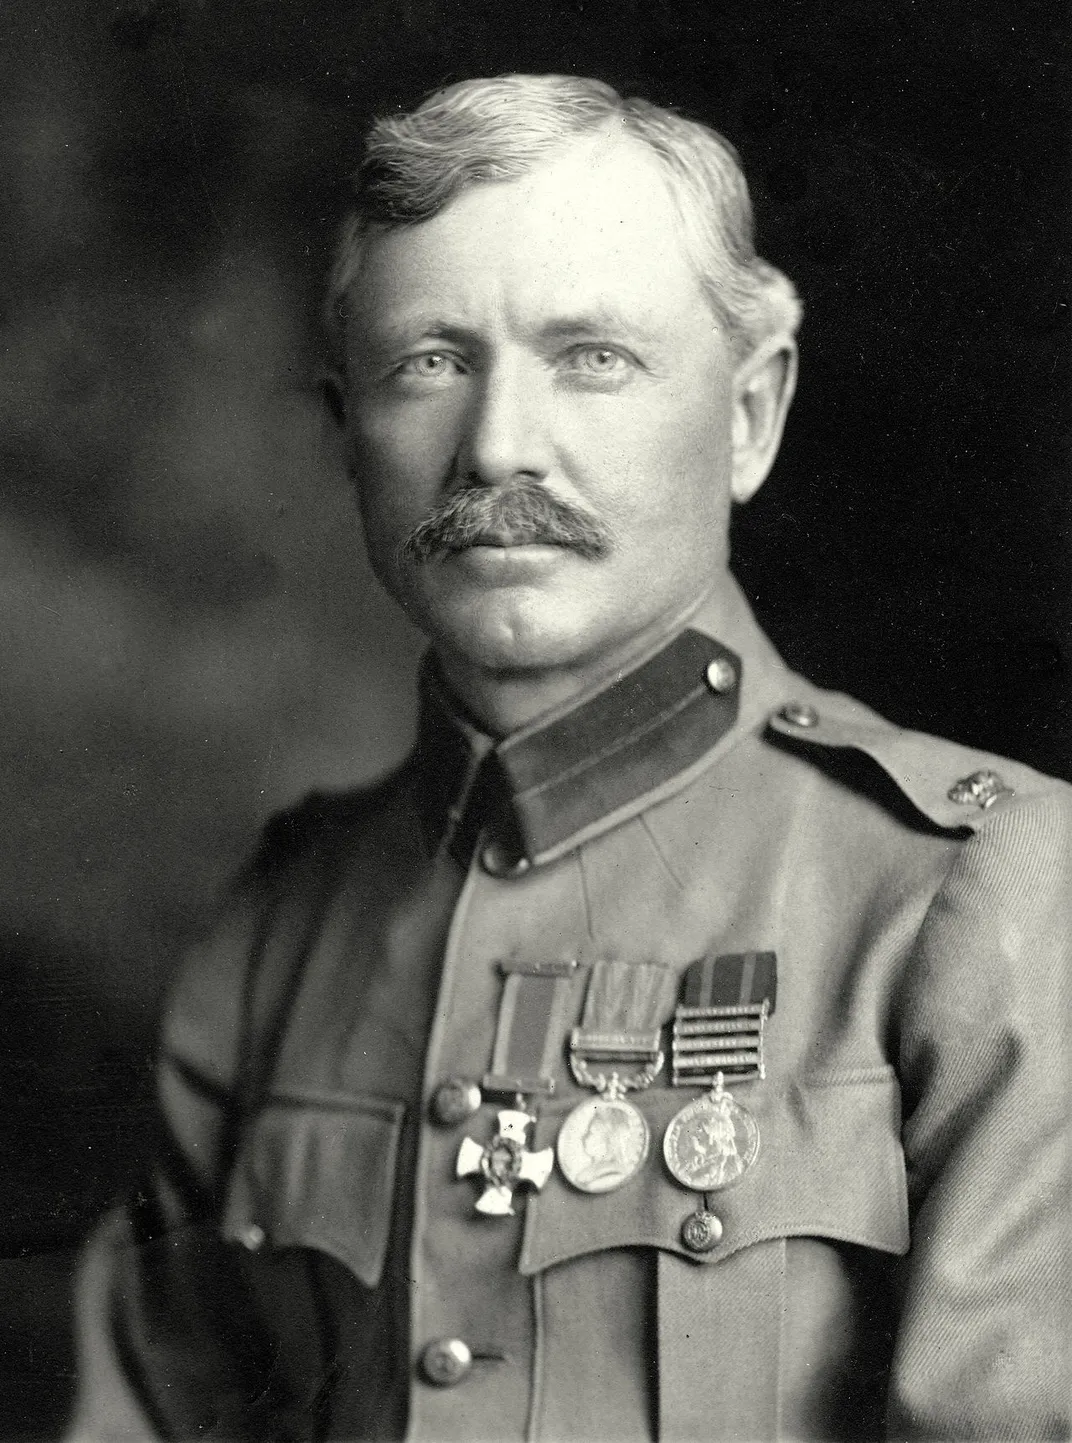 Frederick Russell Burnham, one of the men who testified on Broussard's behalf at the congressional hearing